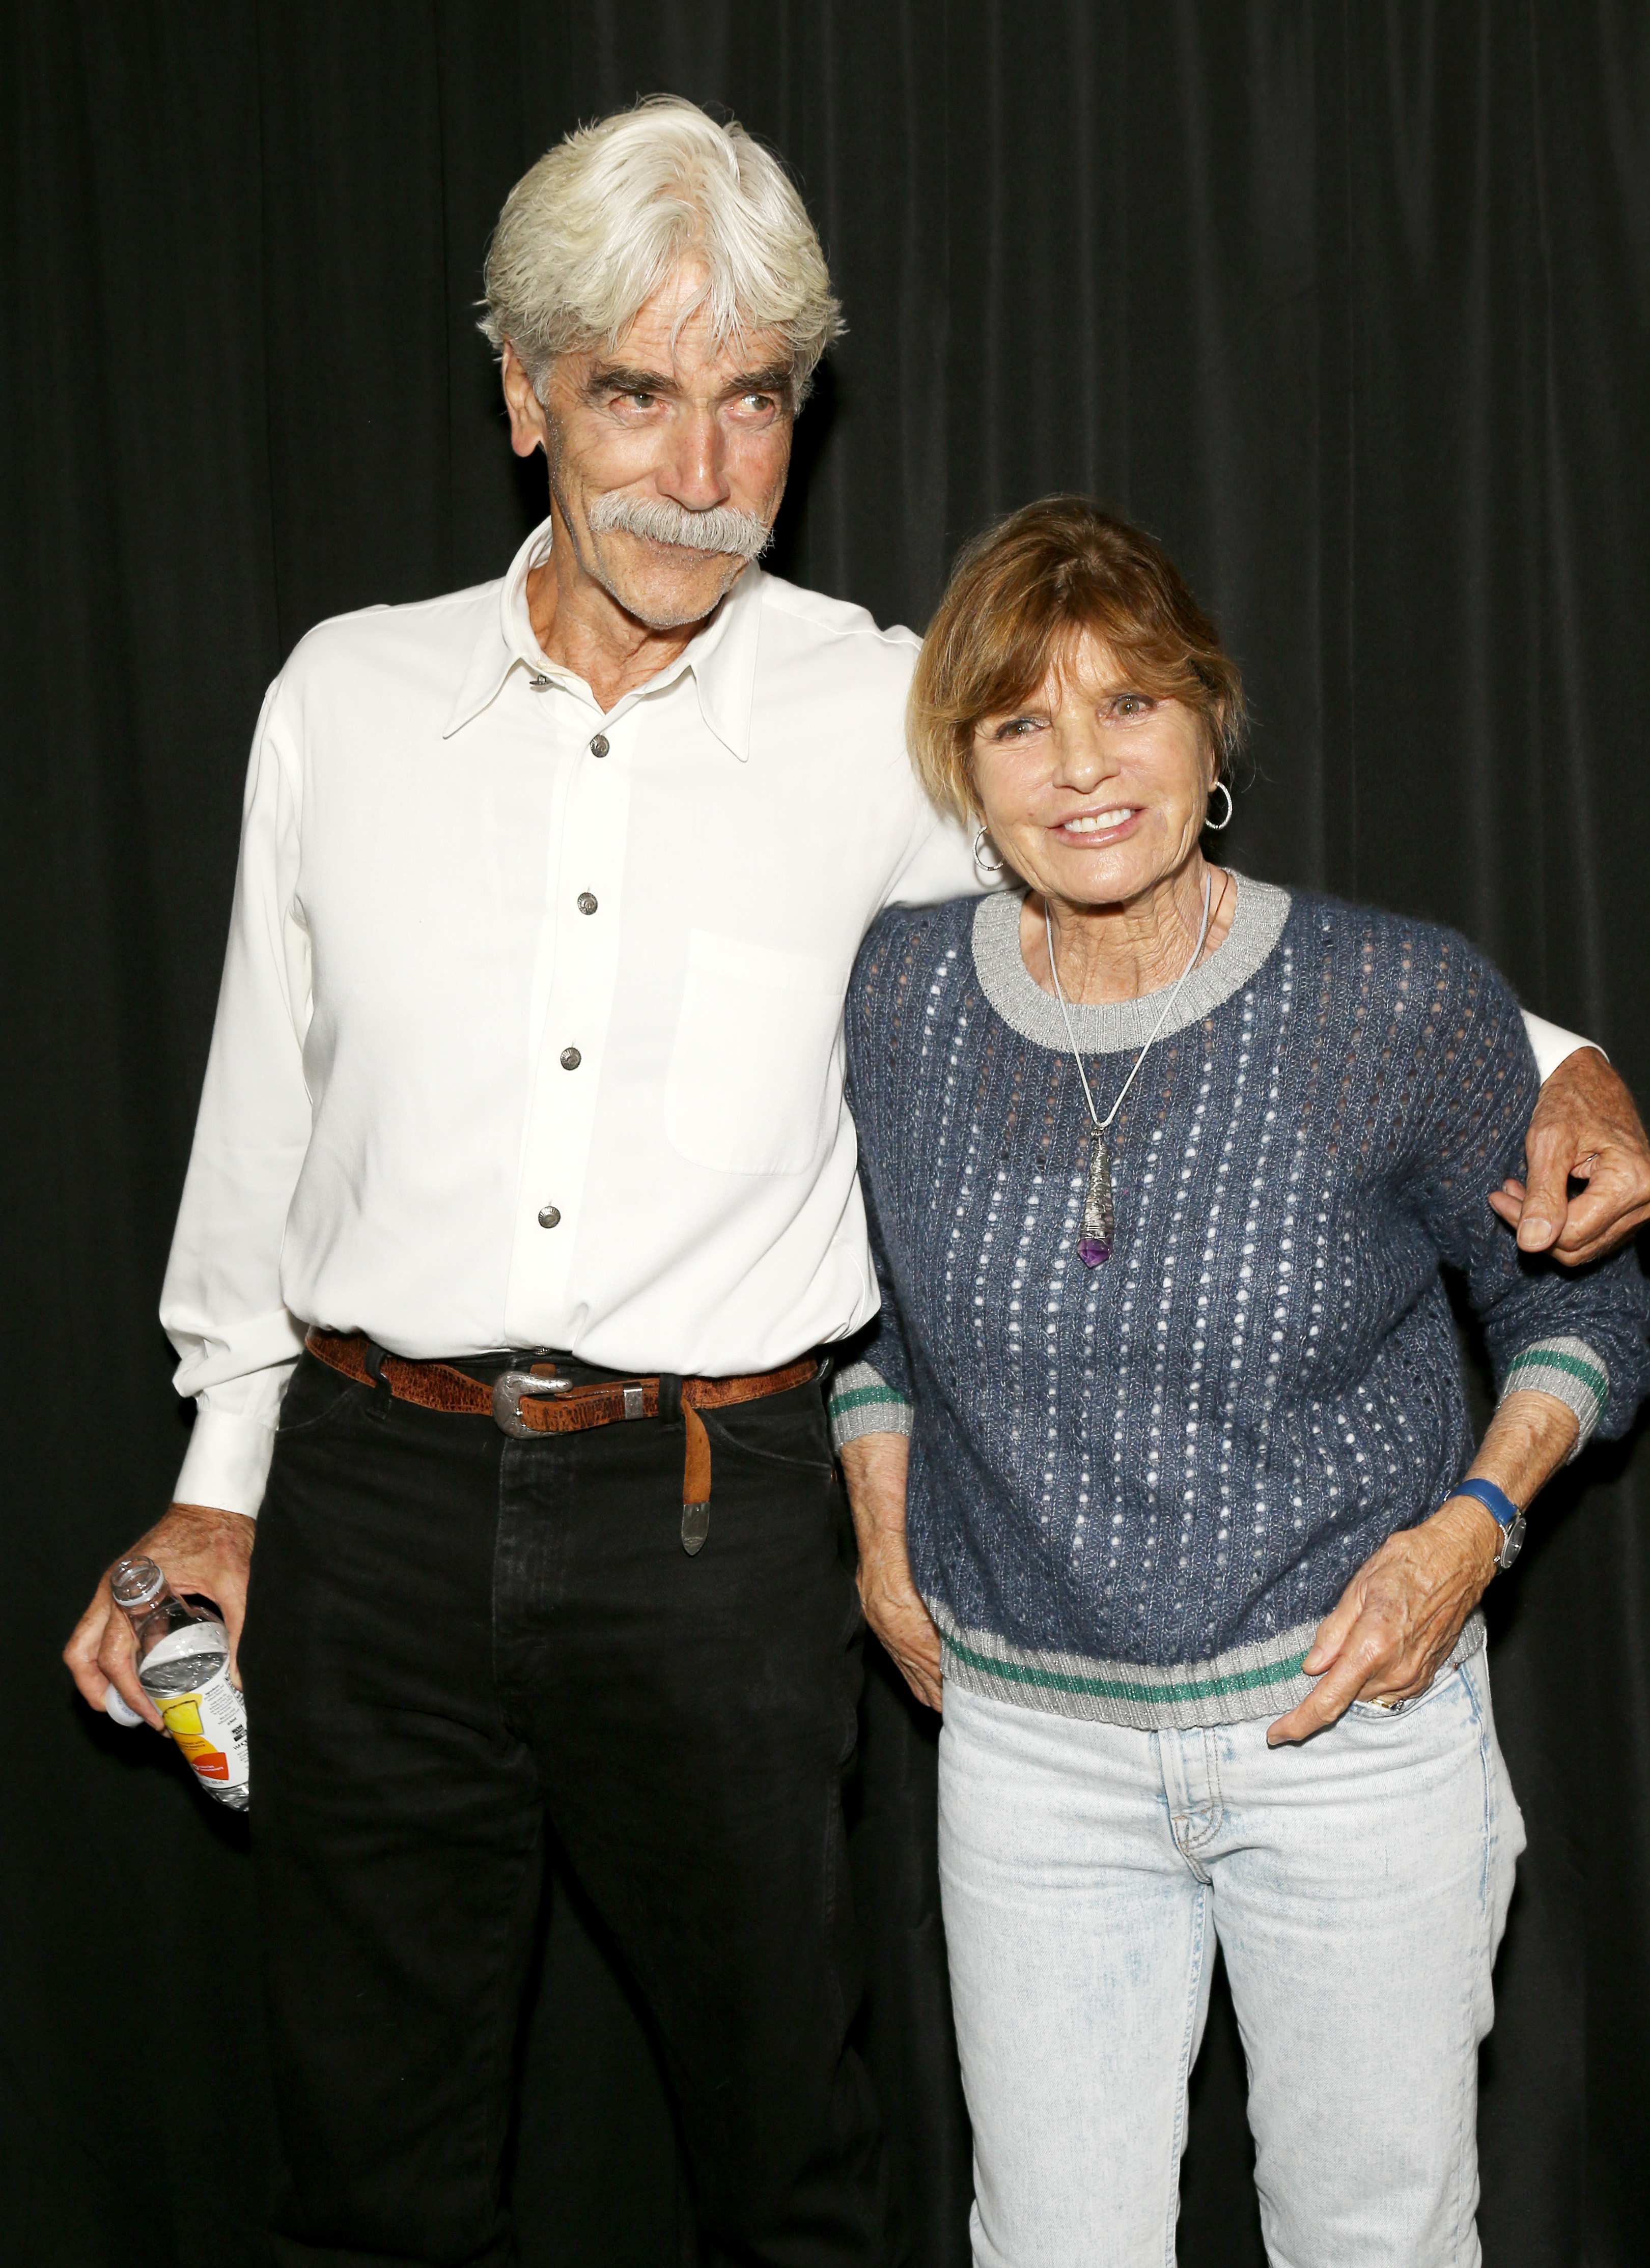 Sam Elliott and Katharine Ross at the premiere of "The Chainsaw Artist" held on September 14, 2019, in Hollywood, California | Source: Getty Images